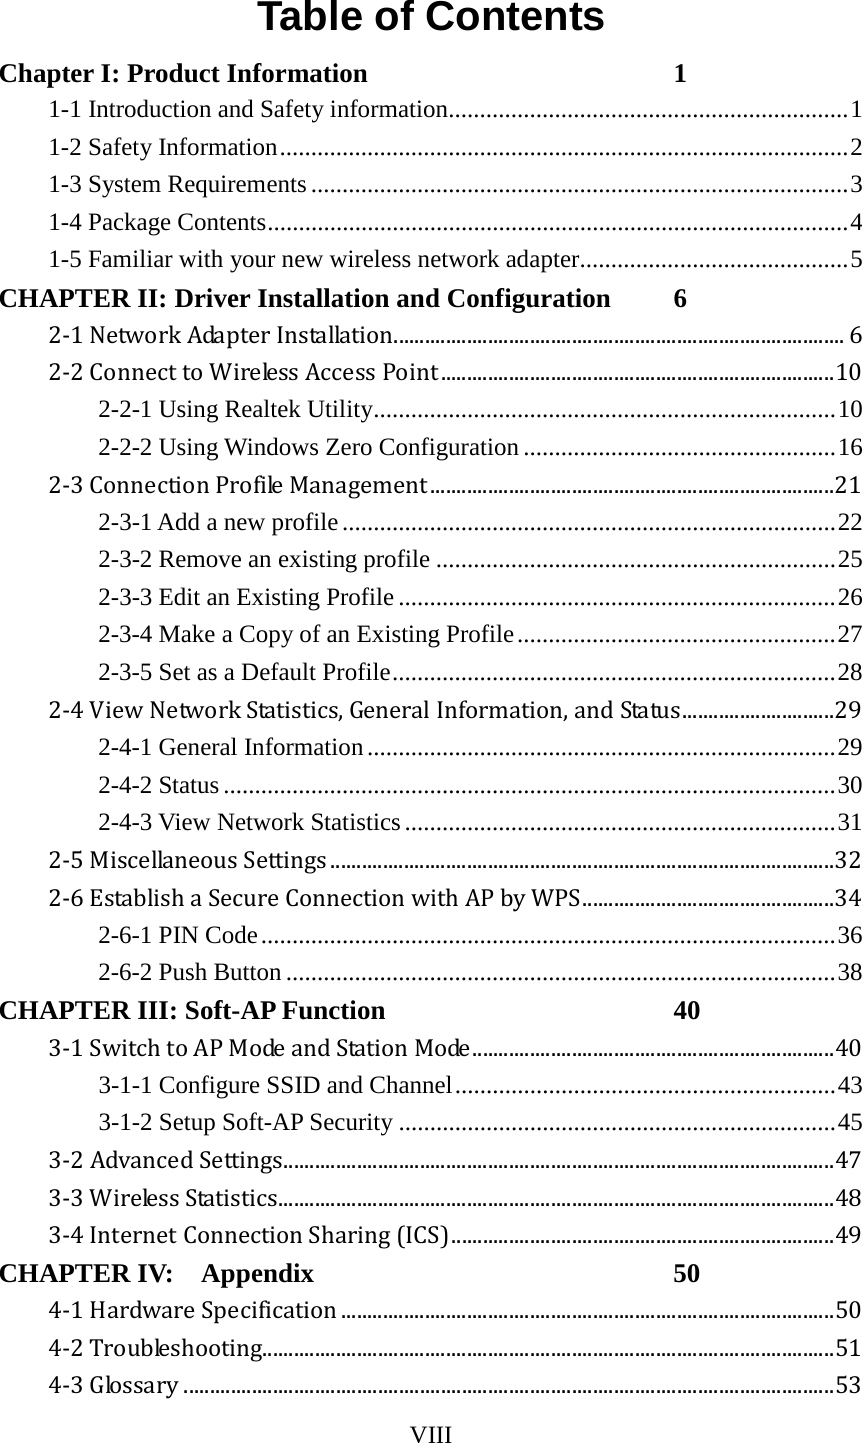 VIII  Table of Contents Chapter I: Product Information  1 1-1 Introduction and Safety information ................................................................ 1 1-2 Safety Information ........................................................................................... 2 1-3 System Requirements ...................................................................................... 3 1-4 Package Contents ............................................................................................. 4 1-5 Familiar with your new wireless network adapter ........................................... 5 CHAPTER II: Driver Installation and Configuration  6 2-1 Network Adapter Installation ...................................................................................... 6 2-2 Connect to Wireless Access Point ........................................................................... 10 2-2-1 Using Realtek Utility .......................................................................... 10 2-2-2 Using Windows Zero Configuration .................................................. 16 2-3 Connection Profile Management ............................................................................. 21 2-3-1 Add a new profile ............................................................................... 22 2-3-2 Remove an existing profile ................................................................ 25 2-3-3 Edit an Existing Profile ...................................................................... 26 2-3-4 Make a Copy of an Existing Profile ................................................... 27 2-3-5 Set as a Default Profile ....................................................................... 28 2-4 View Network Statistics, General Information, and Status ............................. 29 2-4-1 General Information ........................................................................... 29 2-4-2 Status .................................................................................................. 30 2-4-3 View Network Statistics ..................................................................... 31 2-5 Miscellaneous Settings ................................................................................................ 32 2-6 Establish a Secure Connection with AP by WPS ................................................ 34 2-6-1 PIN Code ............................................................................................ 36 2-6-2 Push Button ........................................................................................ 38 CHAPTER III: Soft-AP Function  40 3-1 Switch to AP Mode and Station Mode ..................................................................... 40 3-1-1 Configure SSID and Channel ............................................................. 43 3-1-2 Setup Soft-AP Security ...................................................................... 45 3-2 Advanced Settings ......................................................................................................... 47 3-3 Wireless Statistics .......................................................................................................... 48 3-4 Internet Connection Sharing (ICS) ......................................................................... 49 CHAPTER IV:    Appendix  50 4-1 Hardware Specification .............................................................................................. 50 4-2 Troubleshooting............................................................................................................. 51 4-3 Glossary ............................................................................................................................ 53